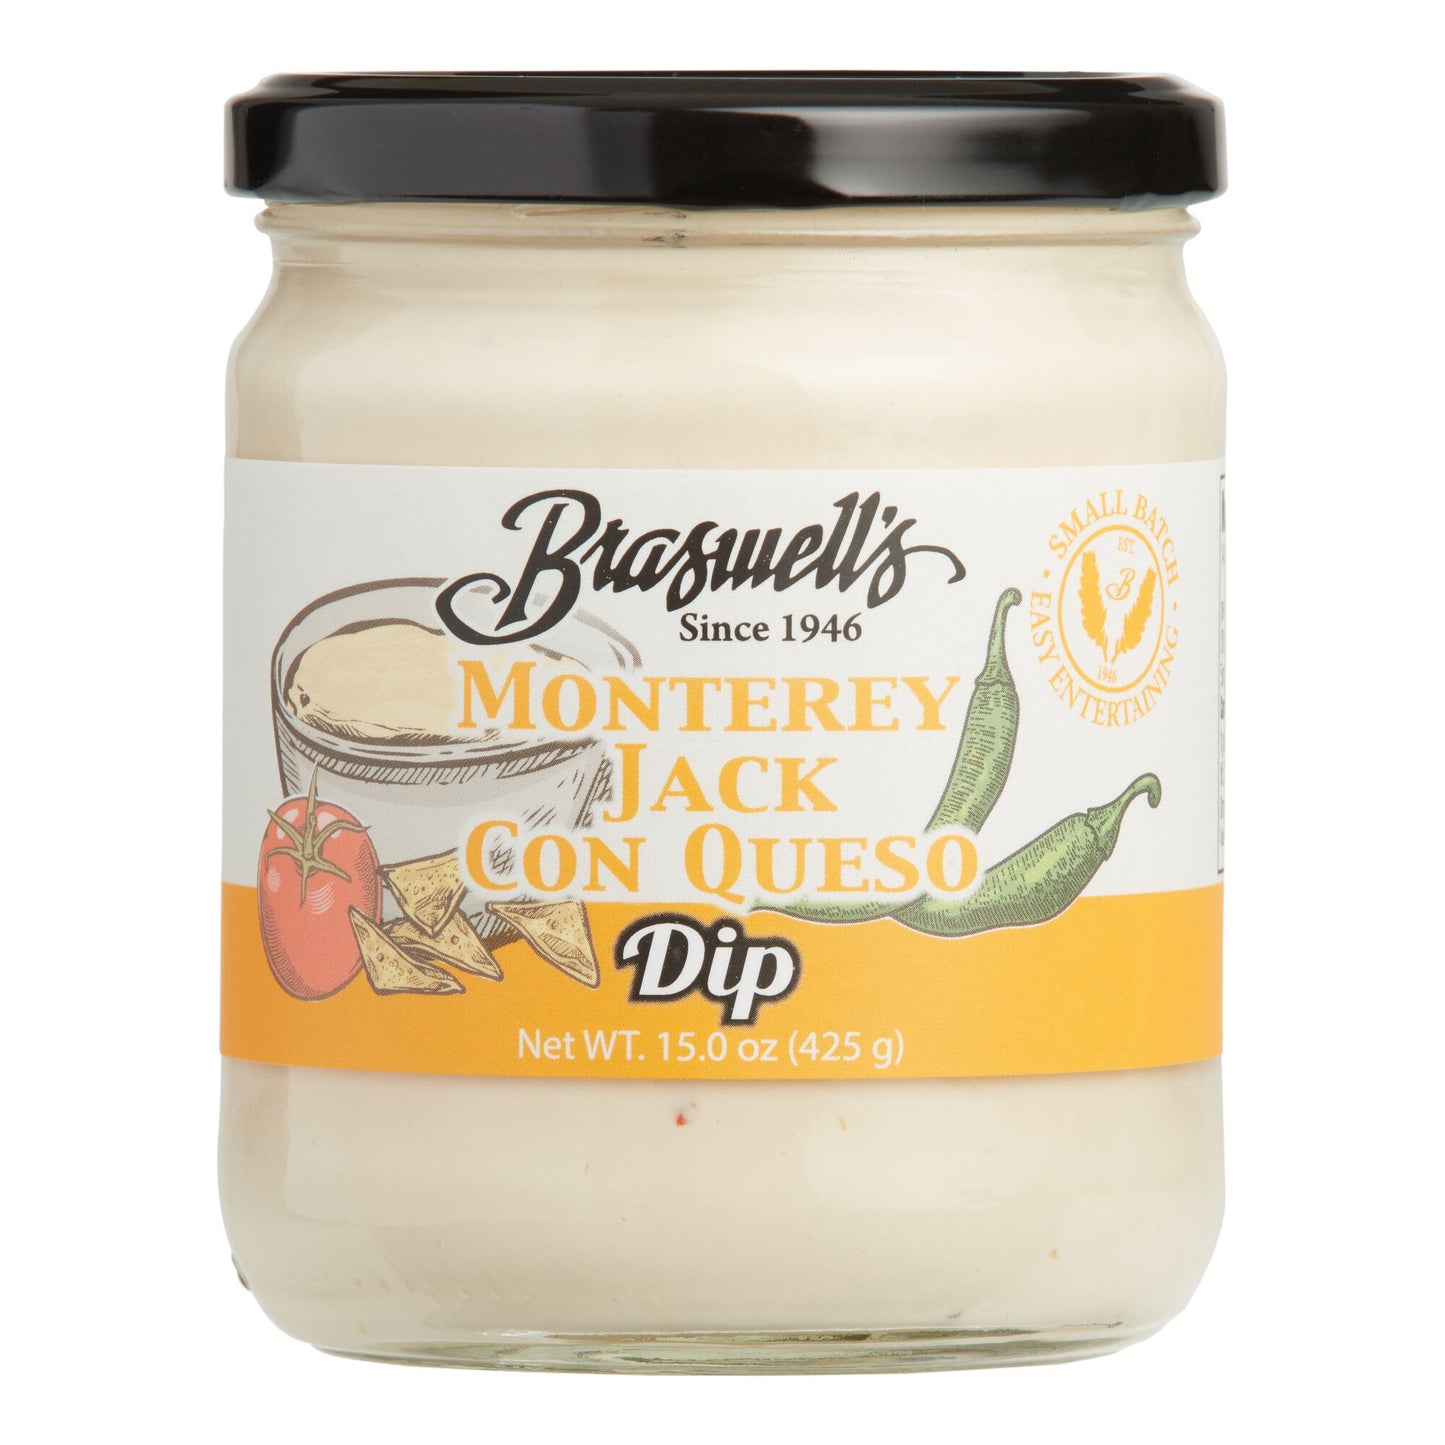 Monterey Jack Con Queso Dip - Braswell's - Local Brand